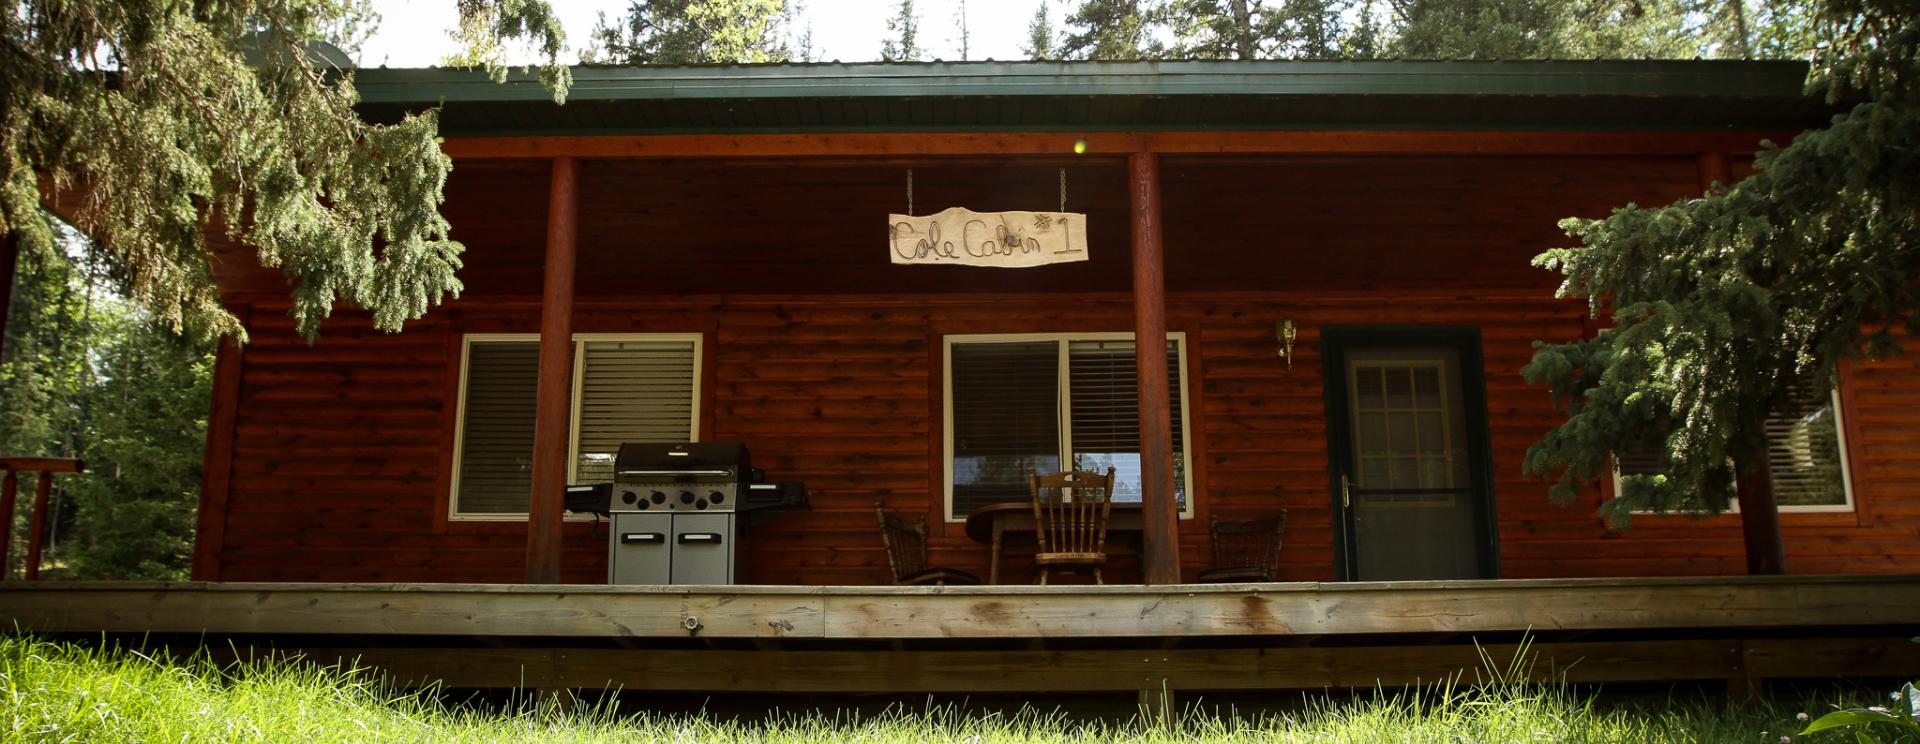 Cole Cabins - Deadwood, SD Hwy 385